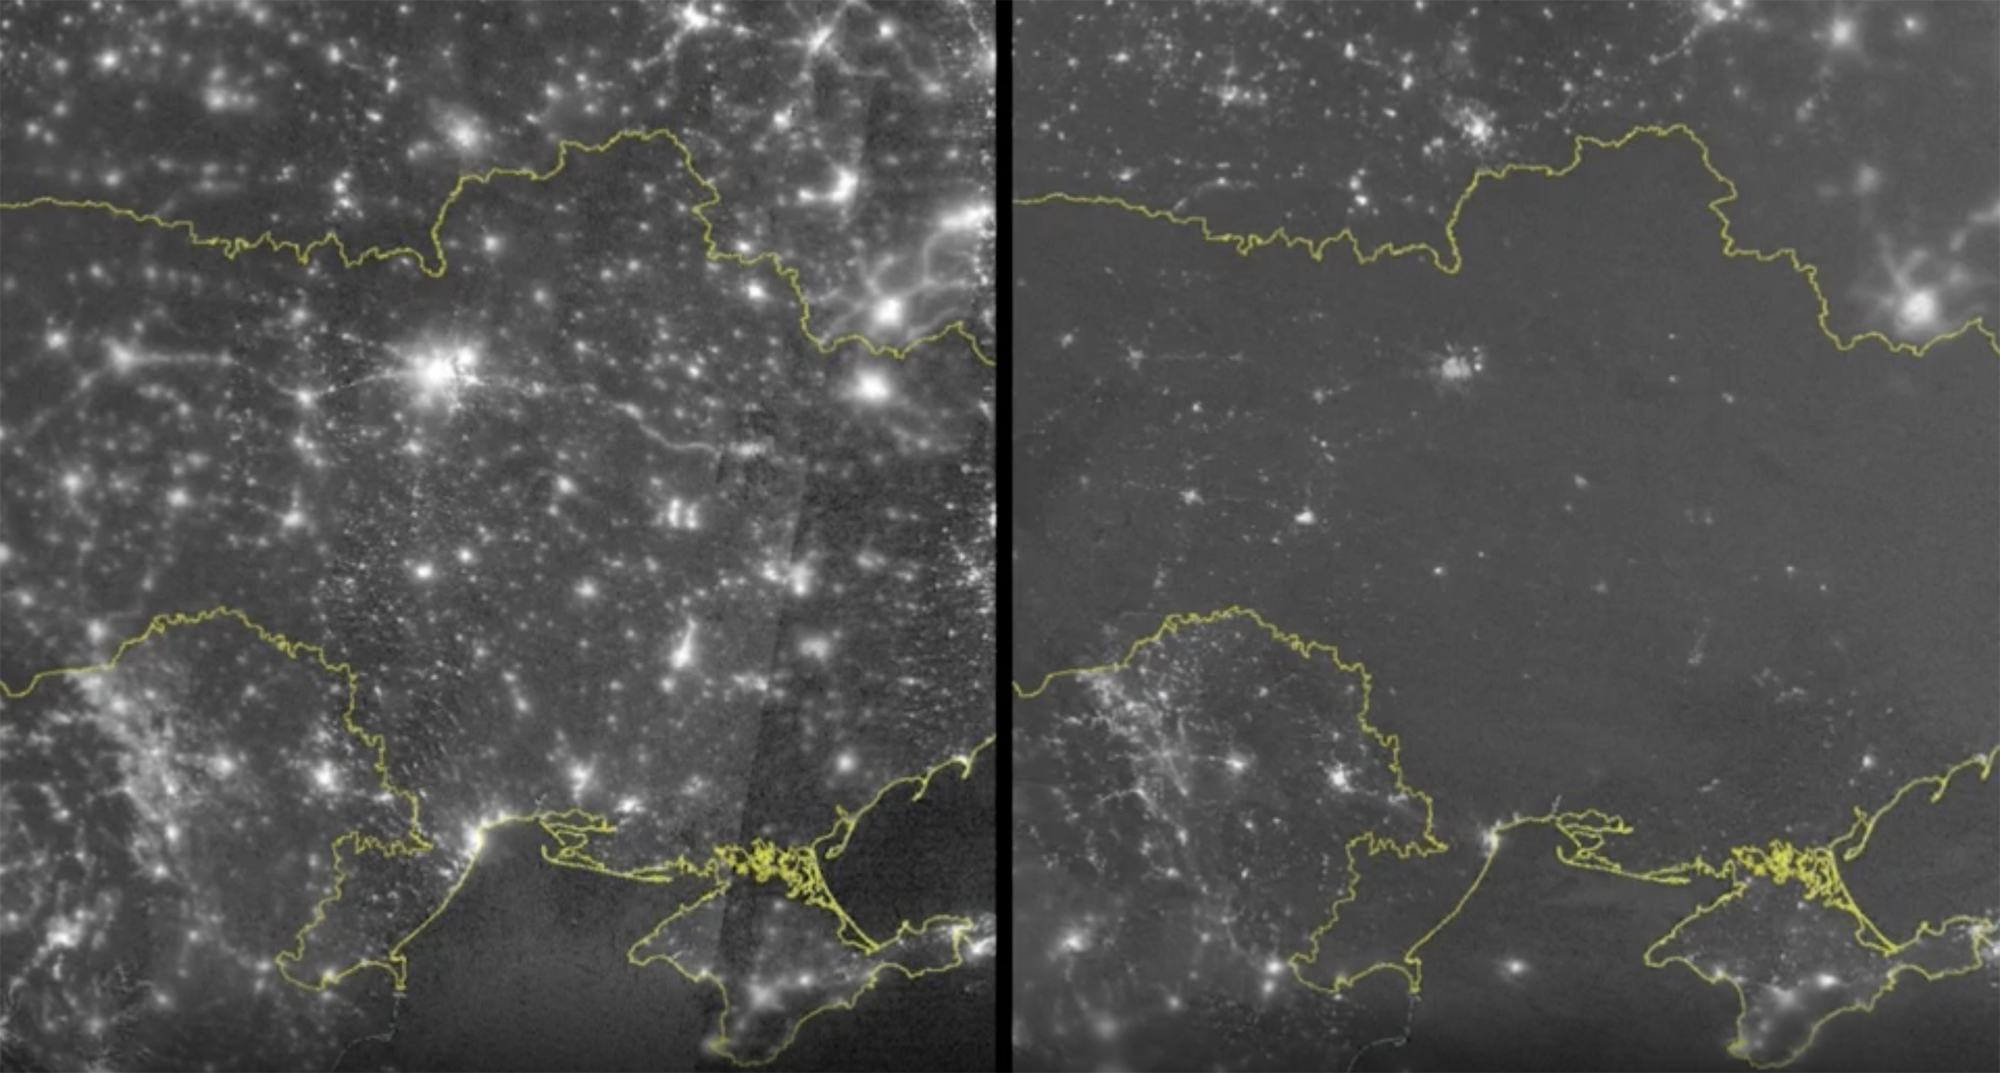 Satellite photos show the difference in illumination from Ukraine from January, on the left, to November, on the right.